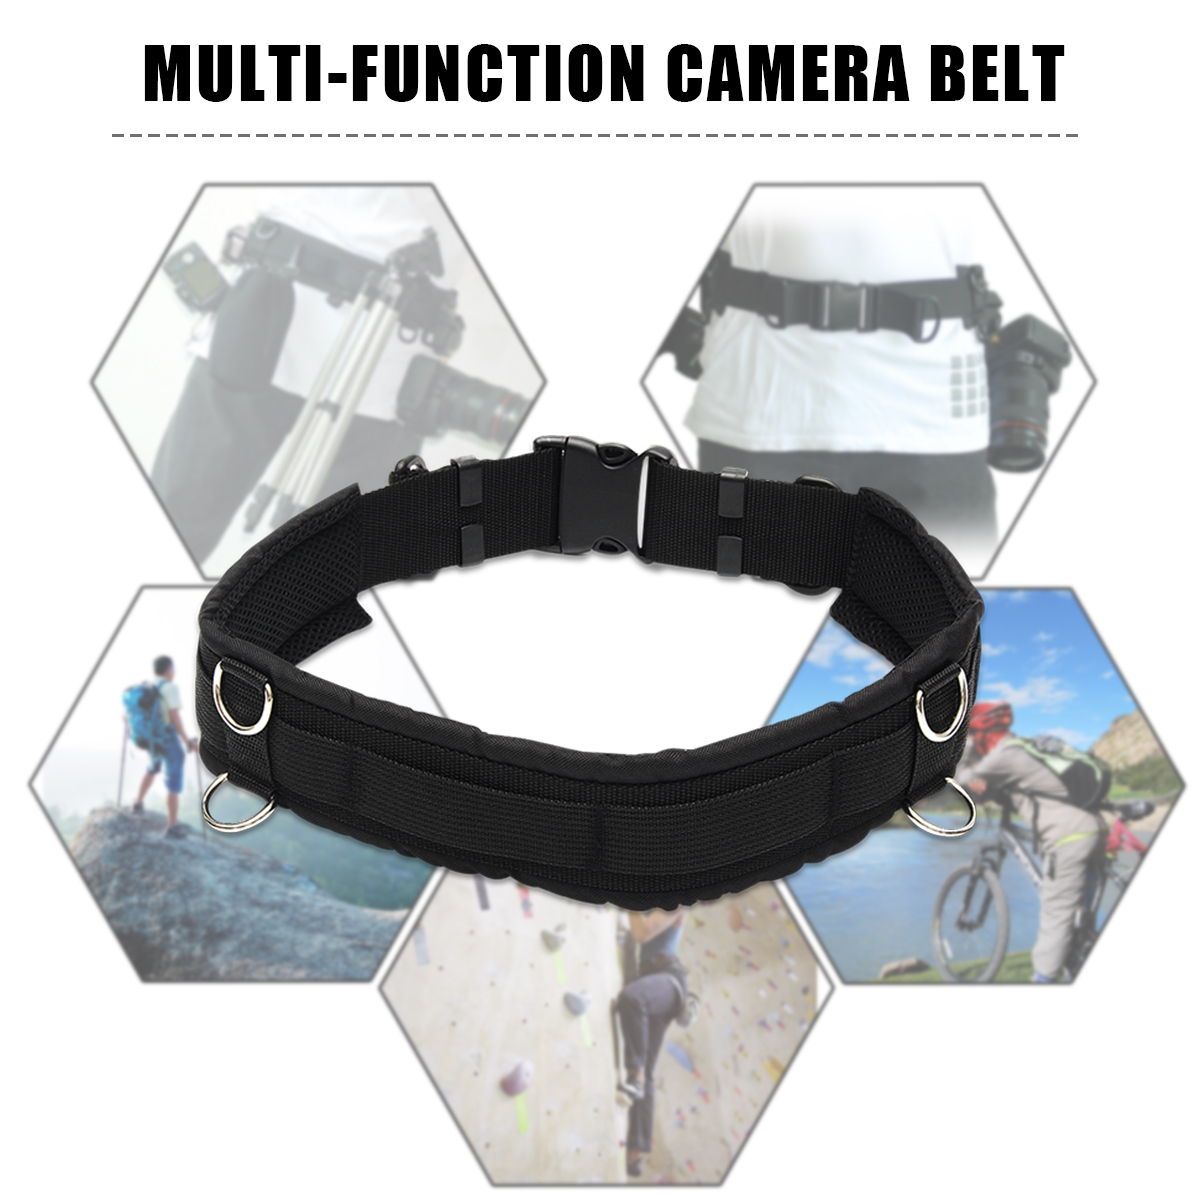 Adjustable-Camera-Waist-Padded-Belt-Lens-Case-Pouch-Bag-Strap-With-8-Ring-for-Outdoor-Photography-1321937